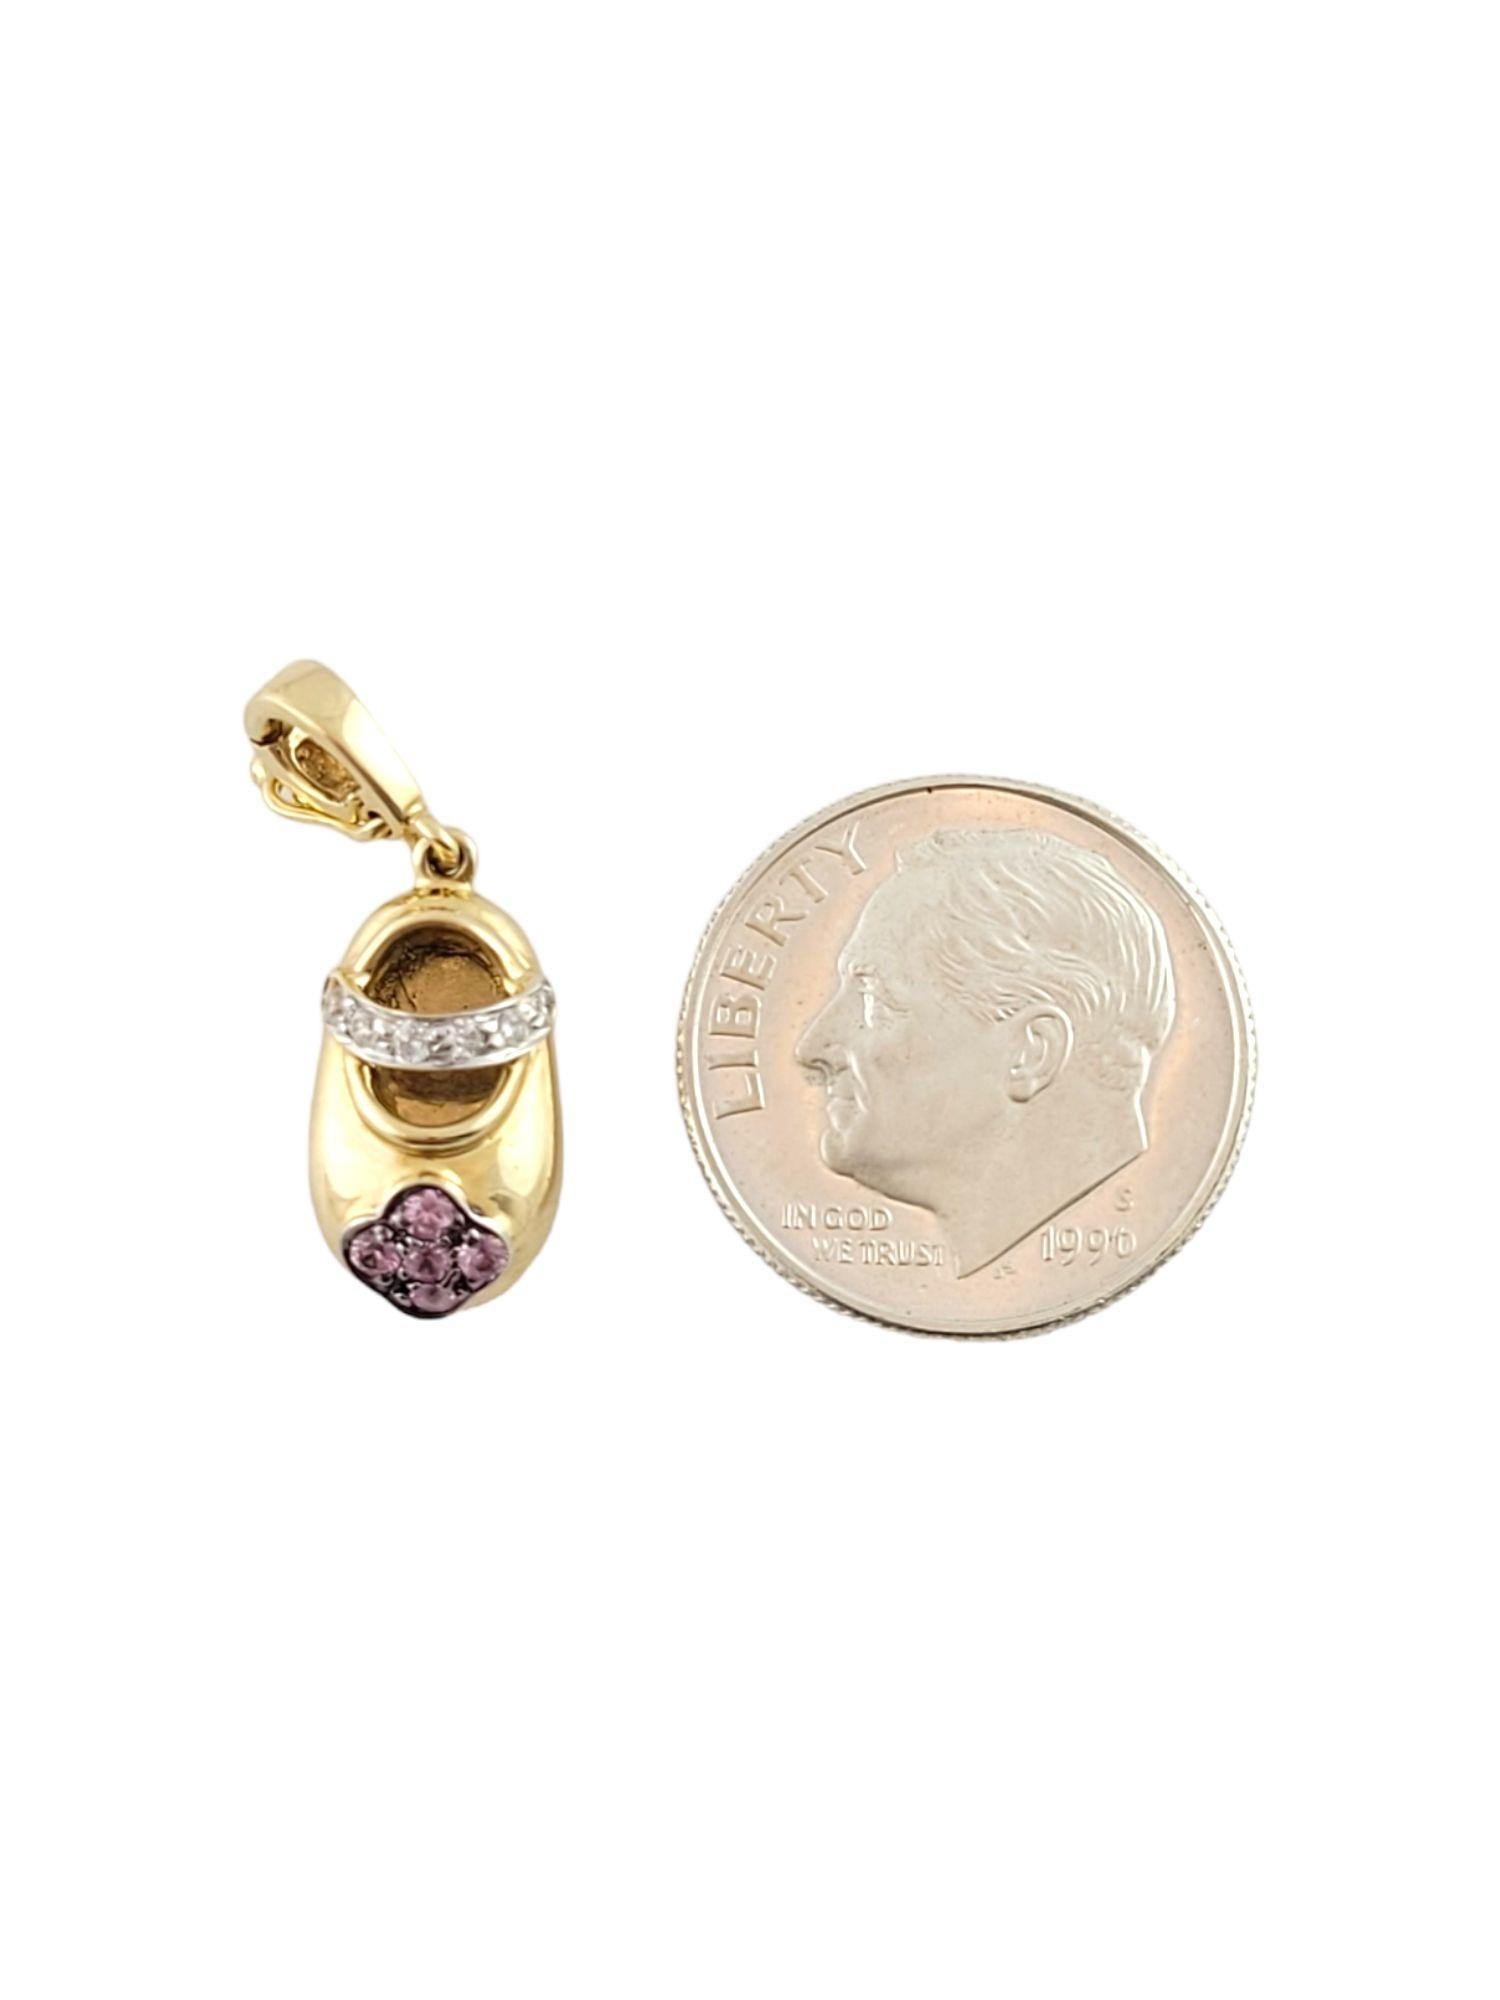 Vintage 14K Yellow Gold Shoe Charm w/ Diamonds & Purple Stones

This adorable 14K gold shoe charm has 5 beautiful purple stones as well as 6 sparkling, round brilliant cut diamonds to represent the strap!

Diamond weight: .05 cts

Diamond clarity: